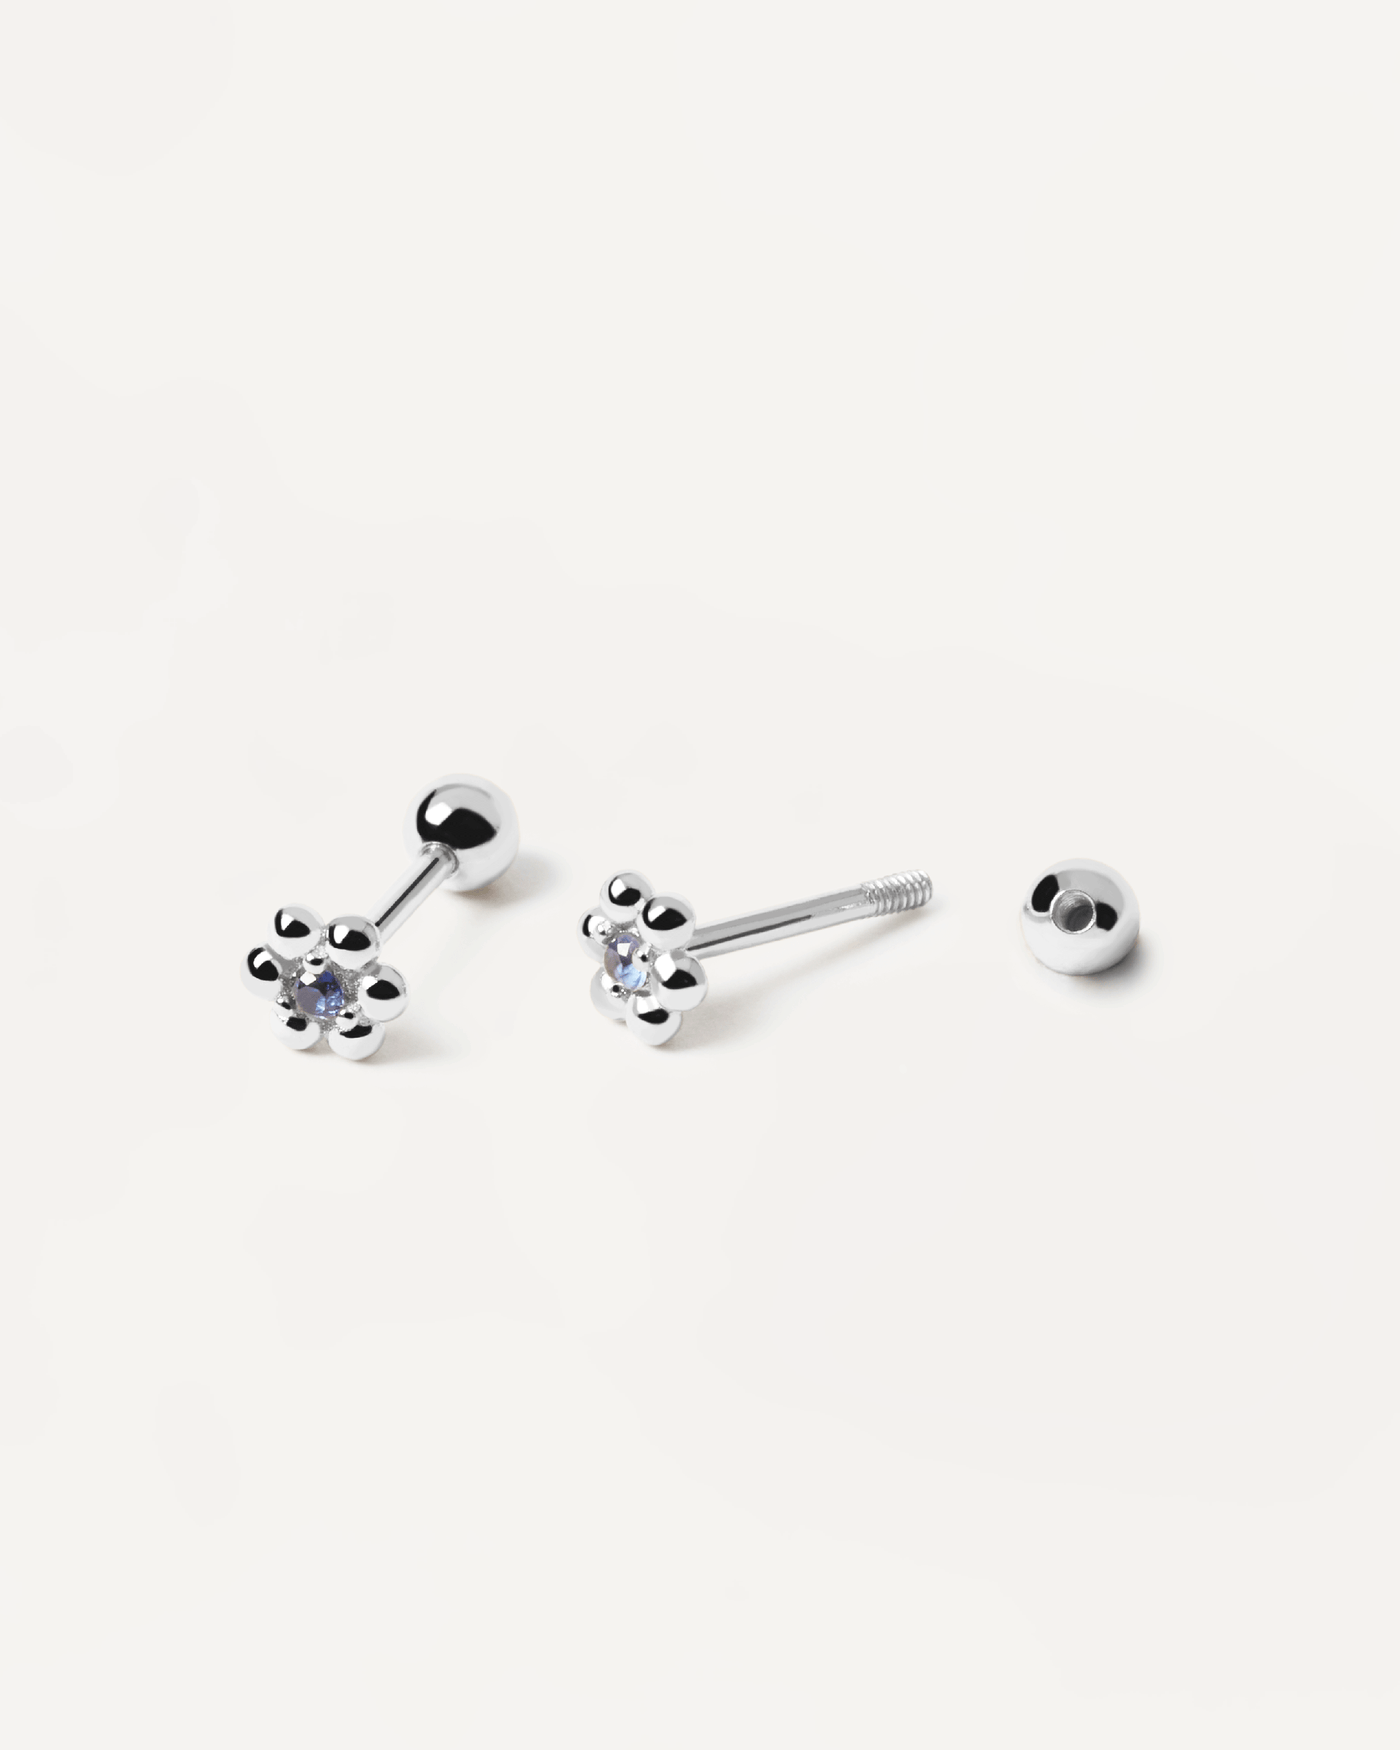 2023 Selection | Marguerite Silver Earrings. Get the latest arrival from PDPAOLA. Place your order safely and get this Best Seller. Free Shipping over 40€